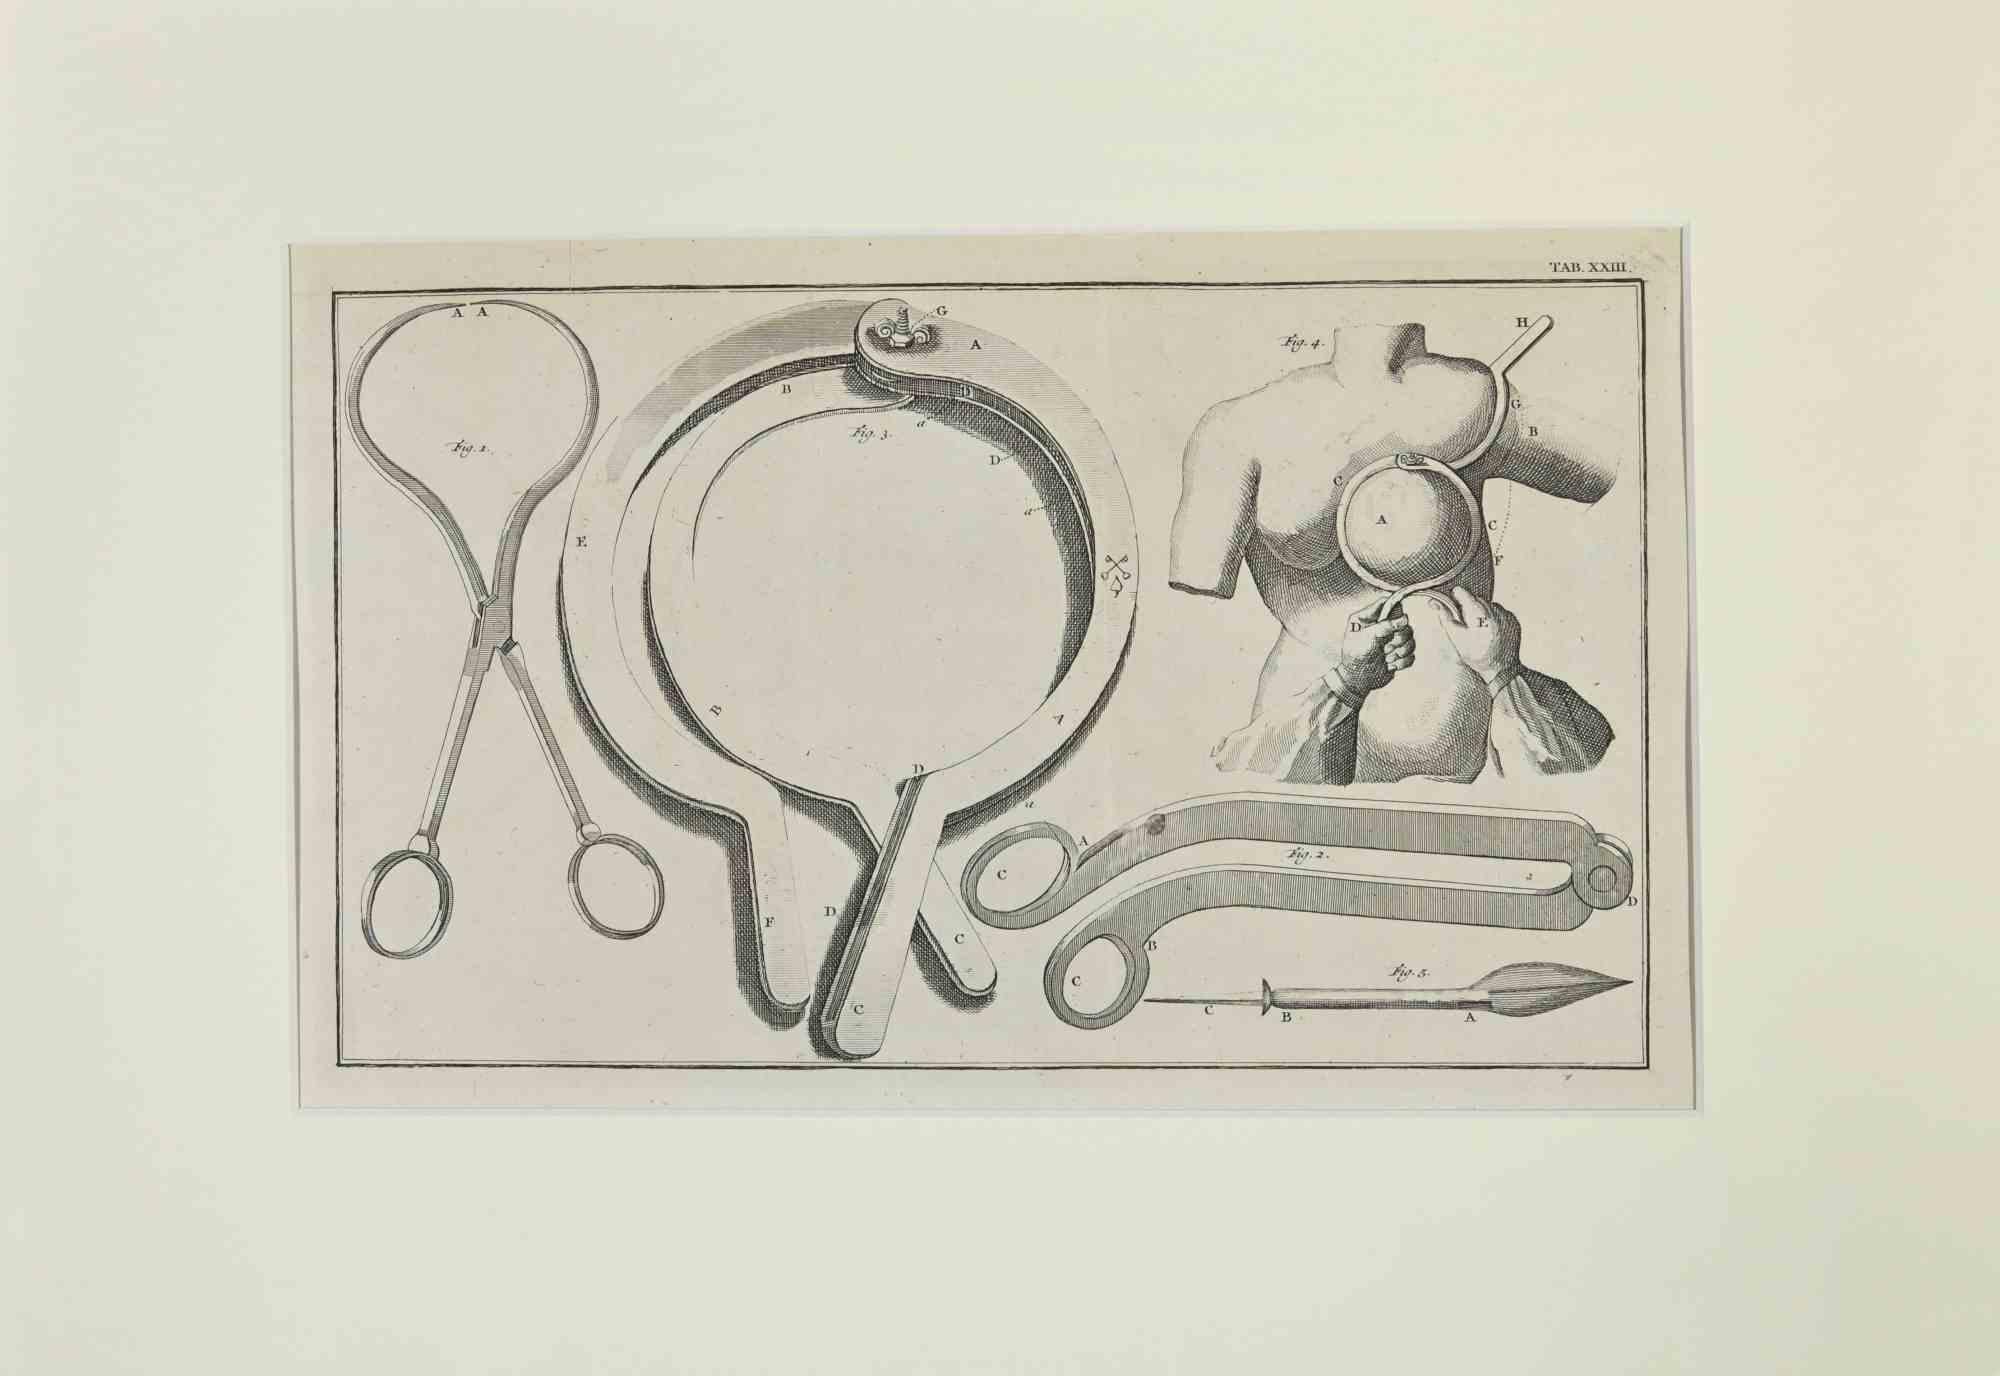 Surgical Instruments is part of the suite realized by Lorenz Heister in the series of Institutiones Chirurgicae, Amsterdam, Janssonius-Waesberg, 1750.

Etching on paper.

The work belongs to the Latin edition of the famous work by the founder of